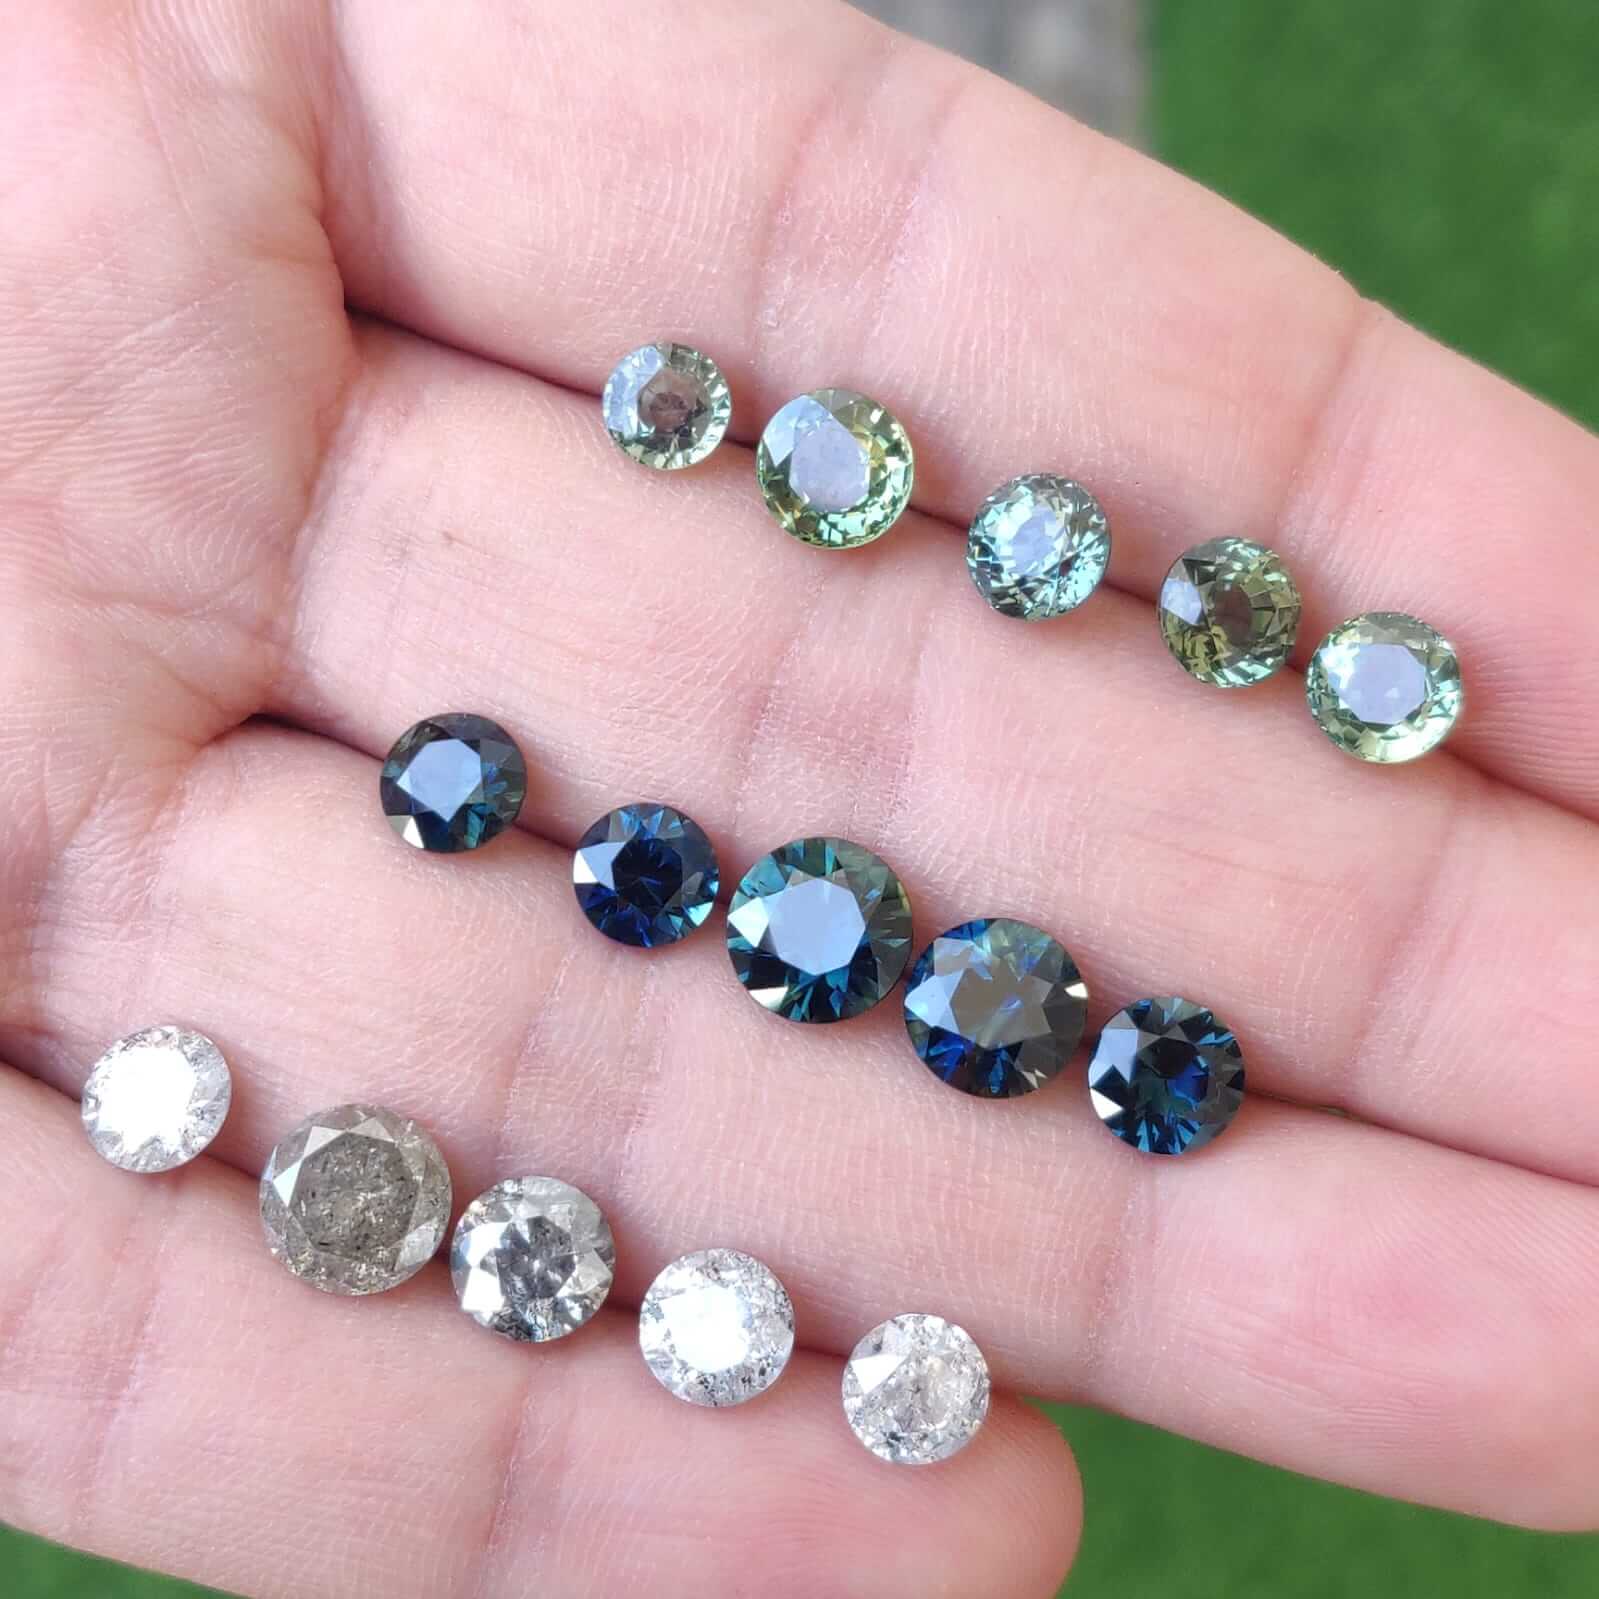 Top to bottom, Green Sapphires; Teal and mermaid sapphires; Salt and Pepper Diamonds